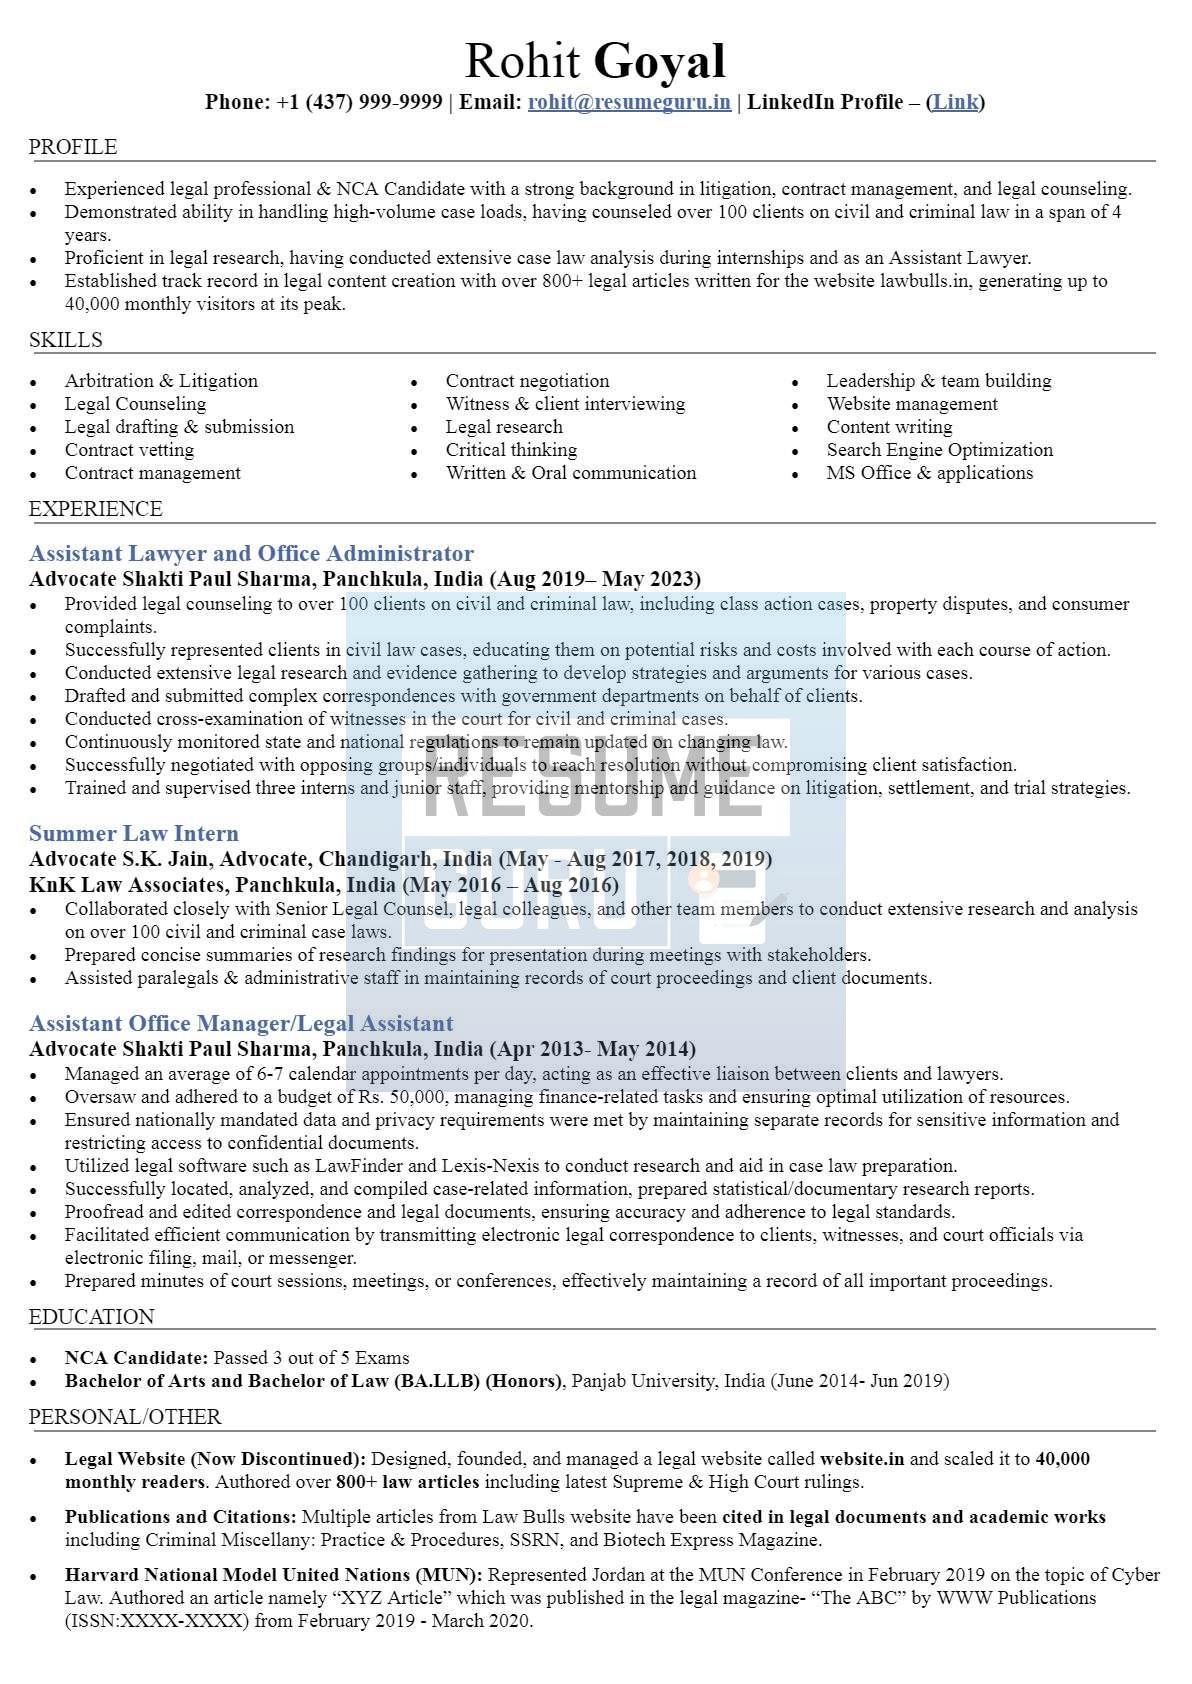 Mid-Level Legal Professional, Assistant Lawyer International Resume Sample_1